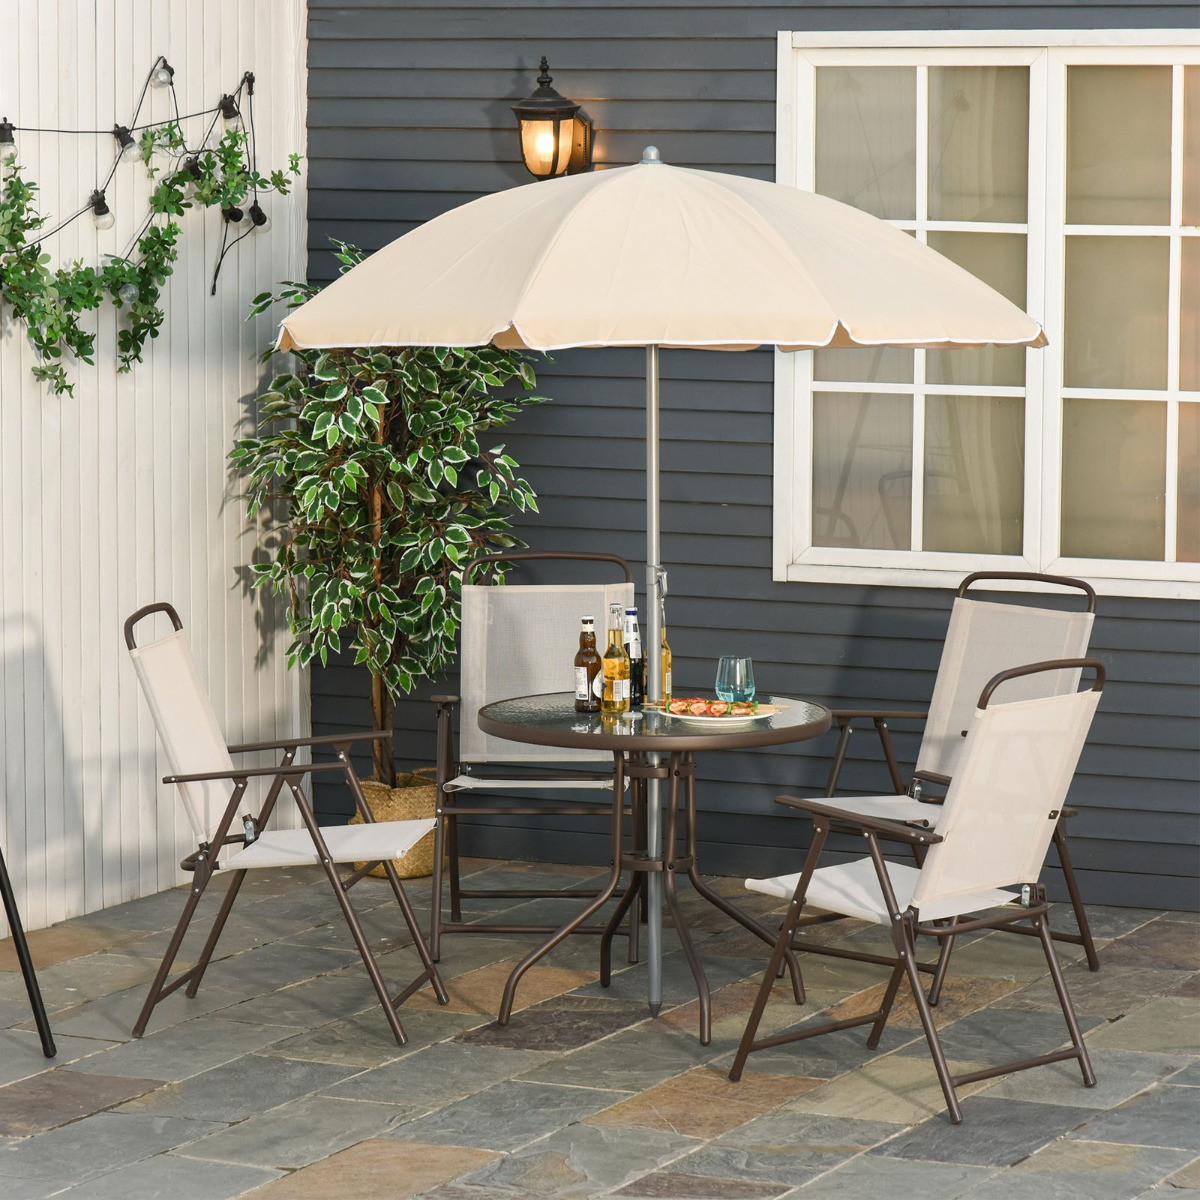 Outsunny Patio Dining Set With Parasol, 6 Piece - Beige>